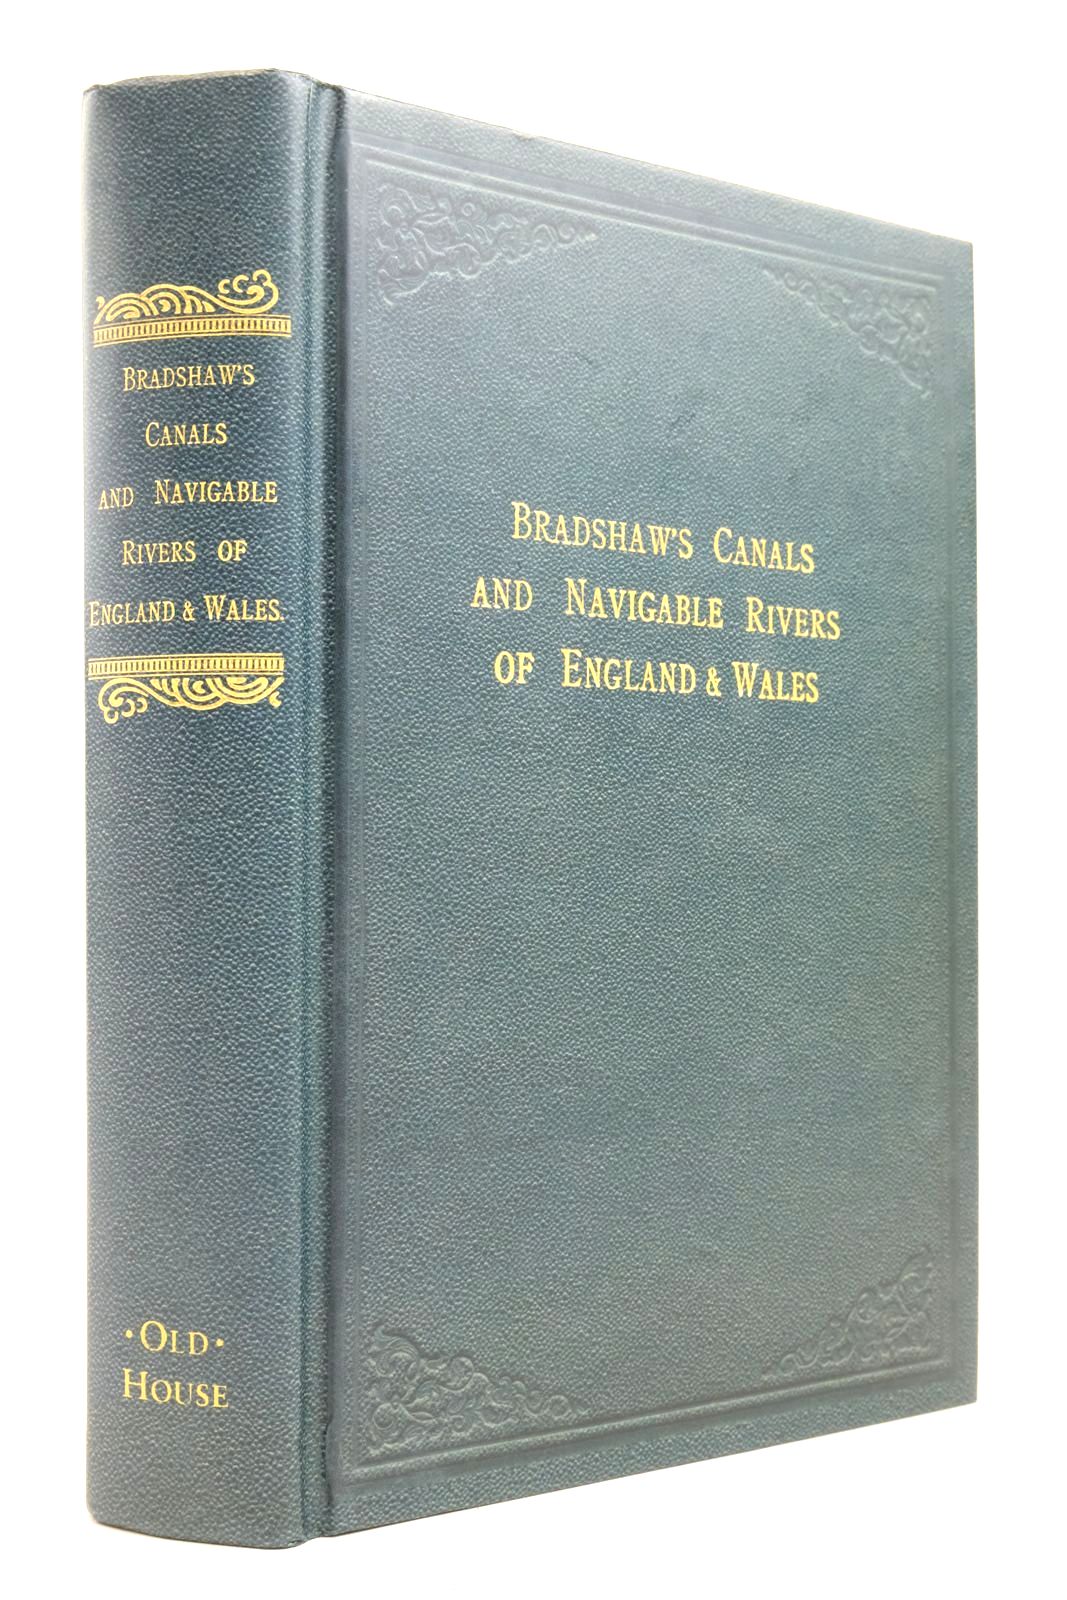 Photo of BRADSHAW'S CANALS AND NAVIGABLE RIVERS OF ENGLAND AND WALES- Stock Number: 2137783